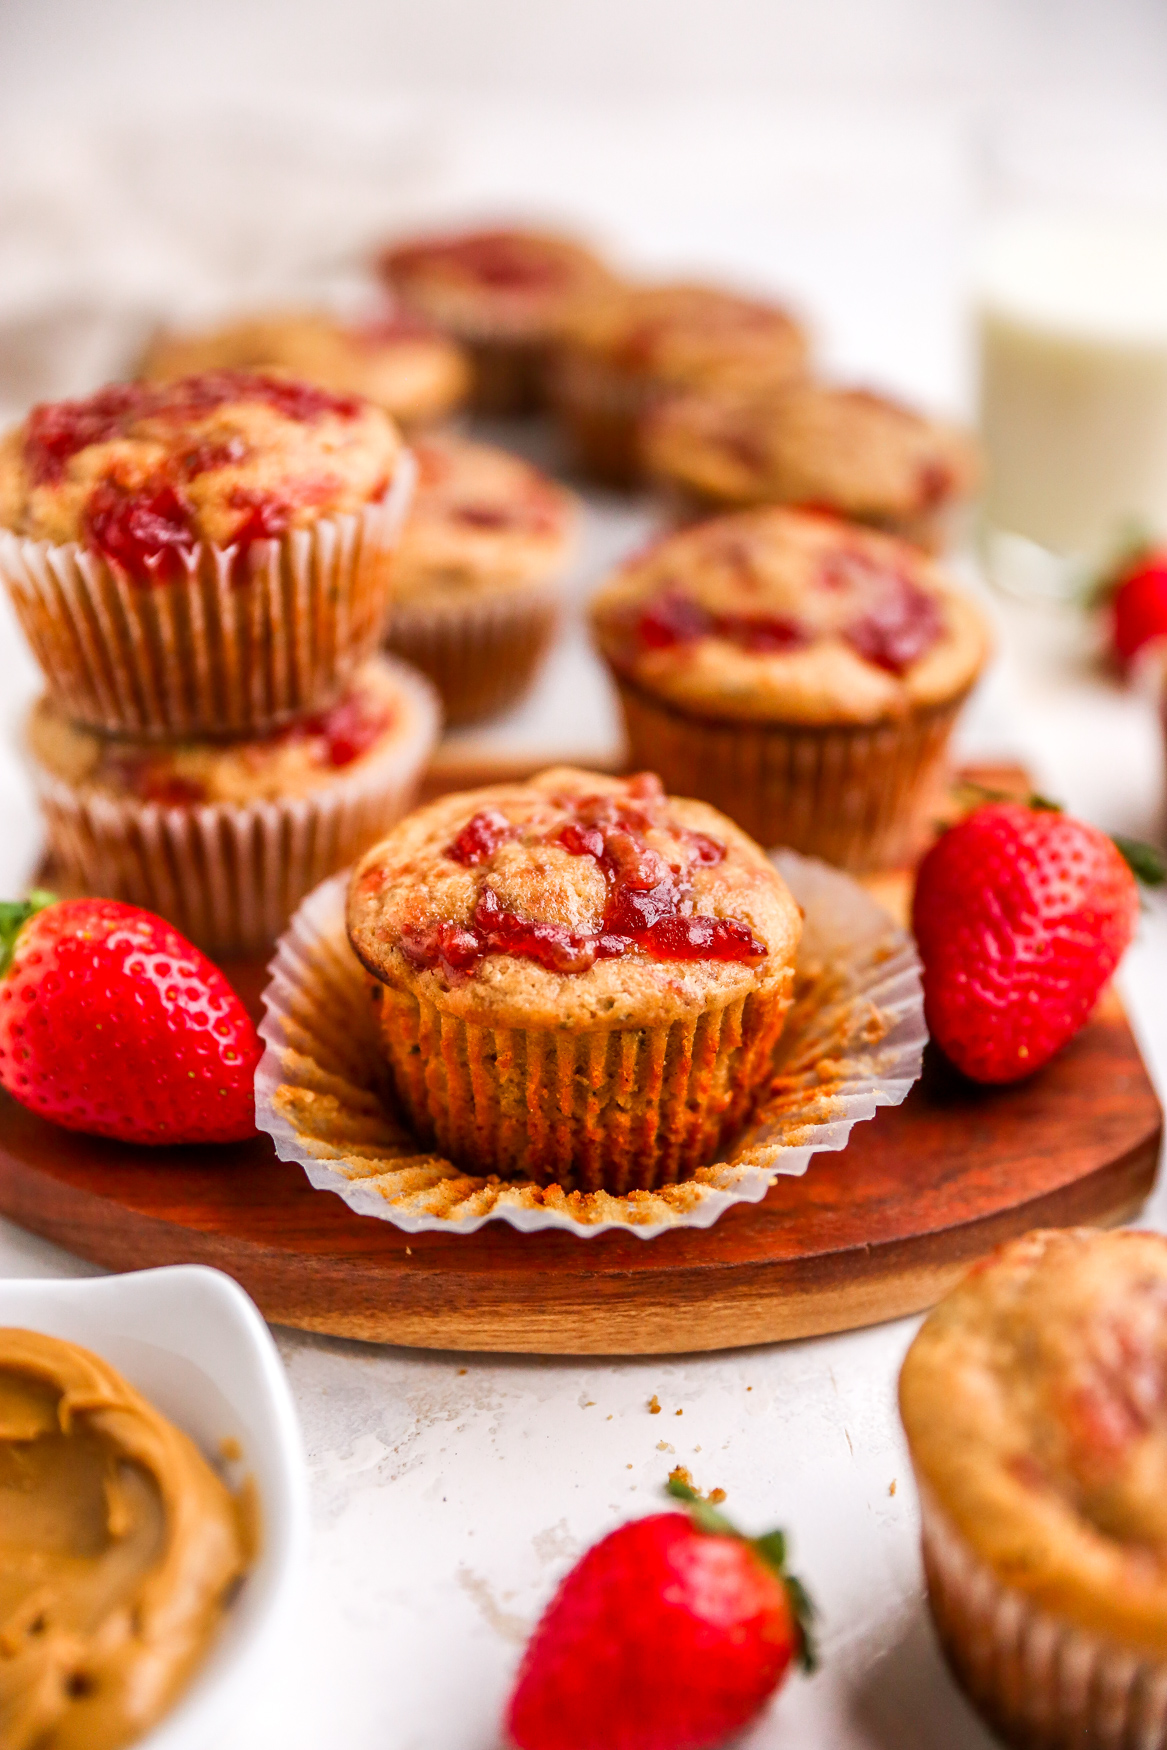 Peanut Butter &amp; Jelly Muffins - Yes to Yolks